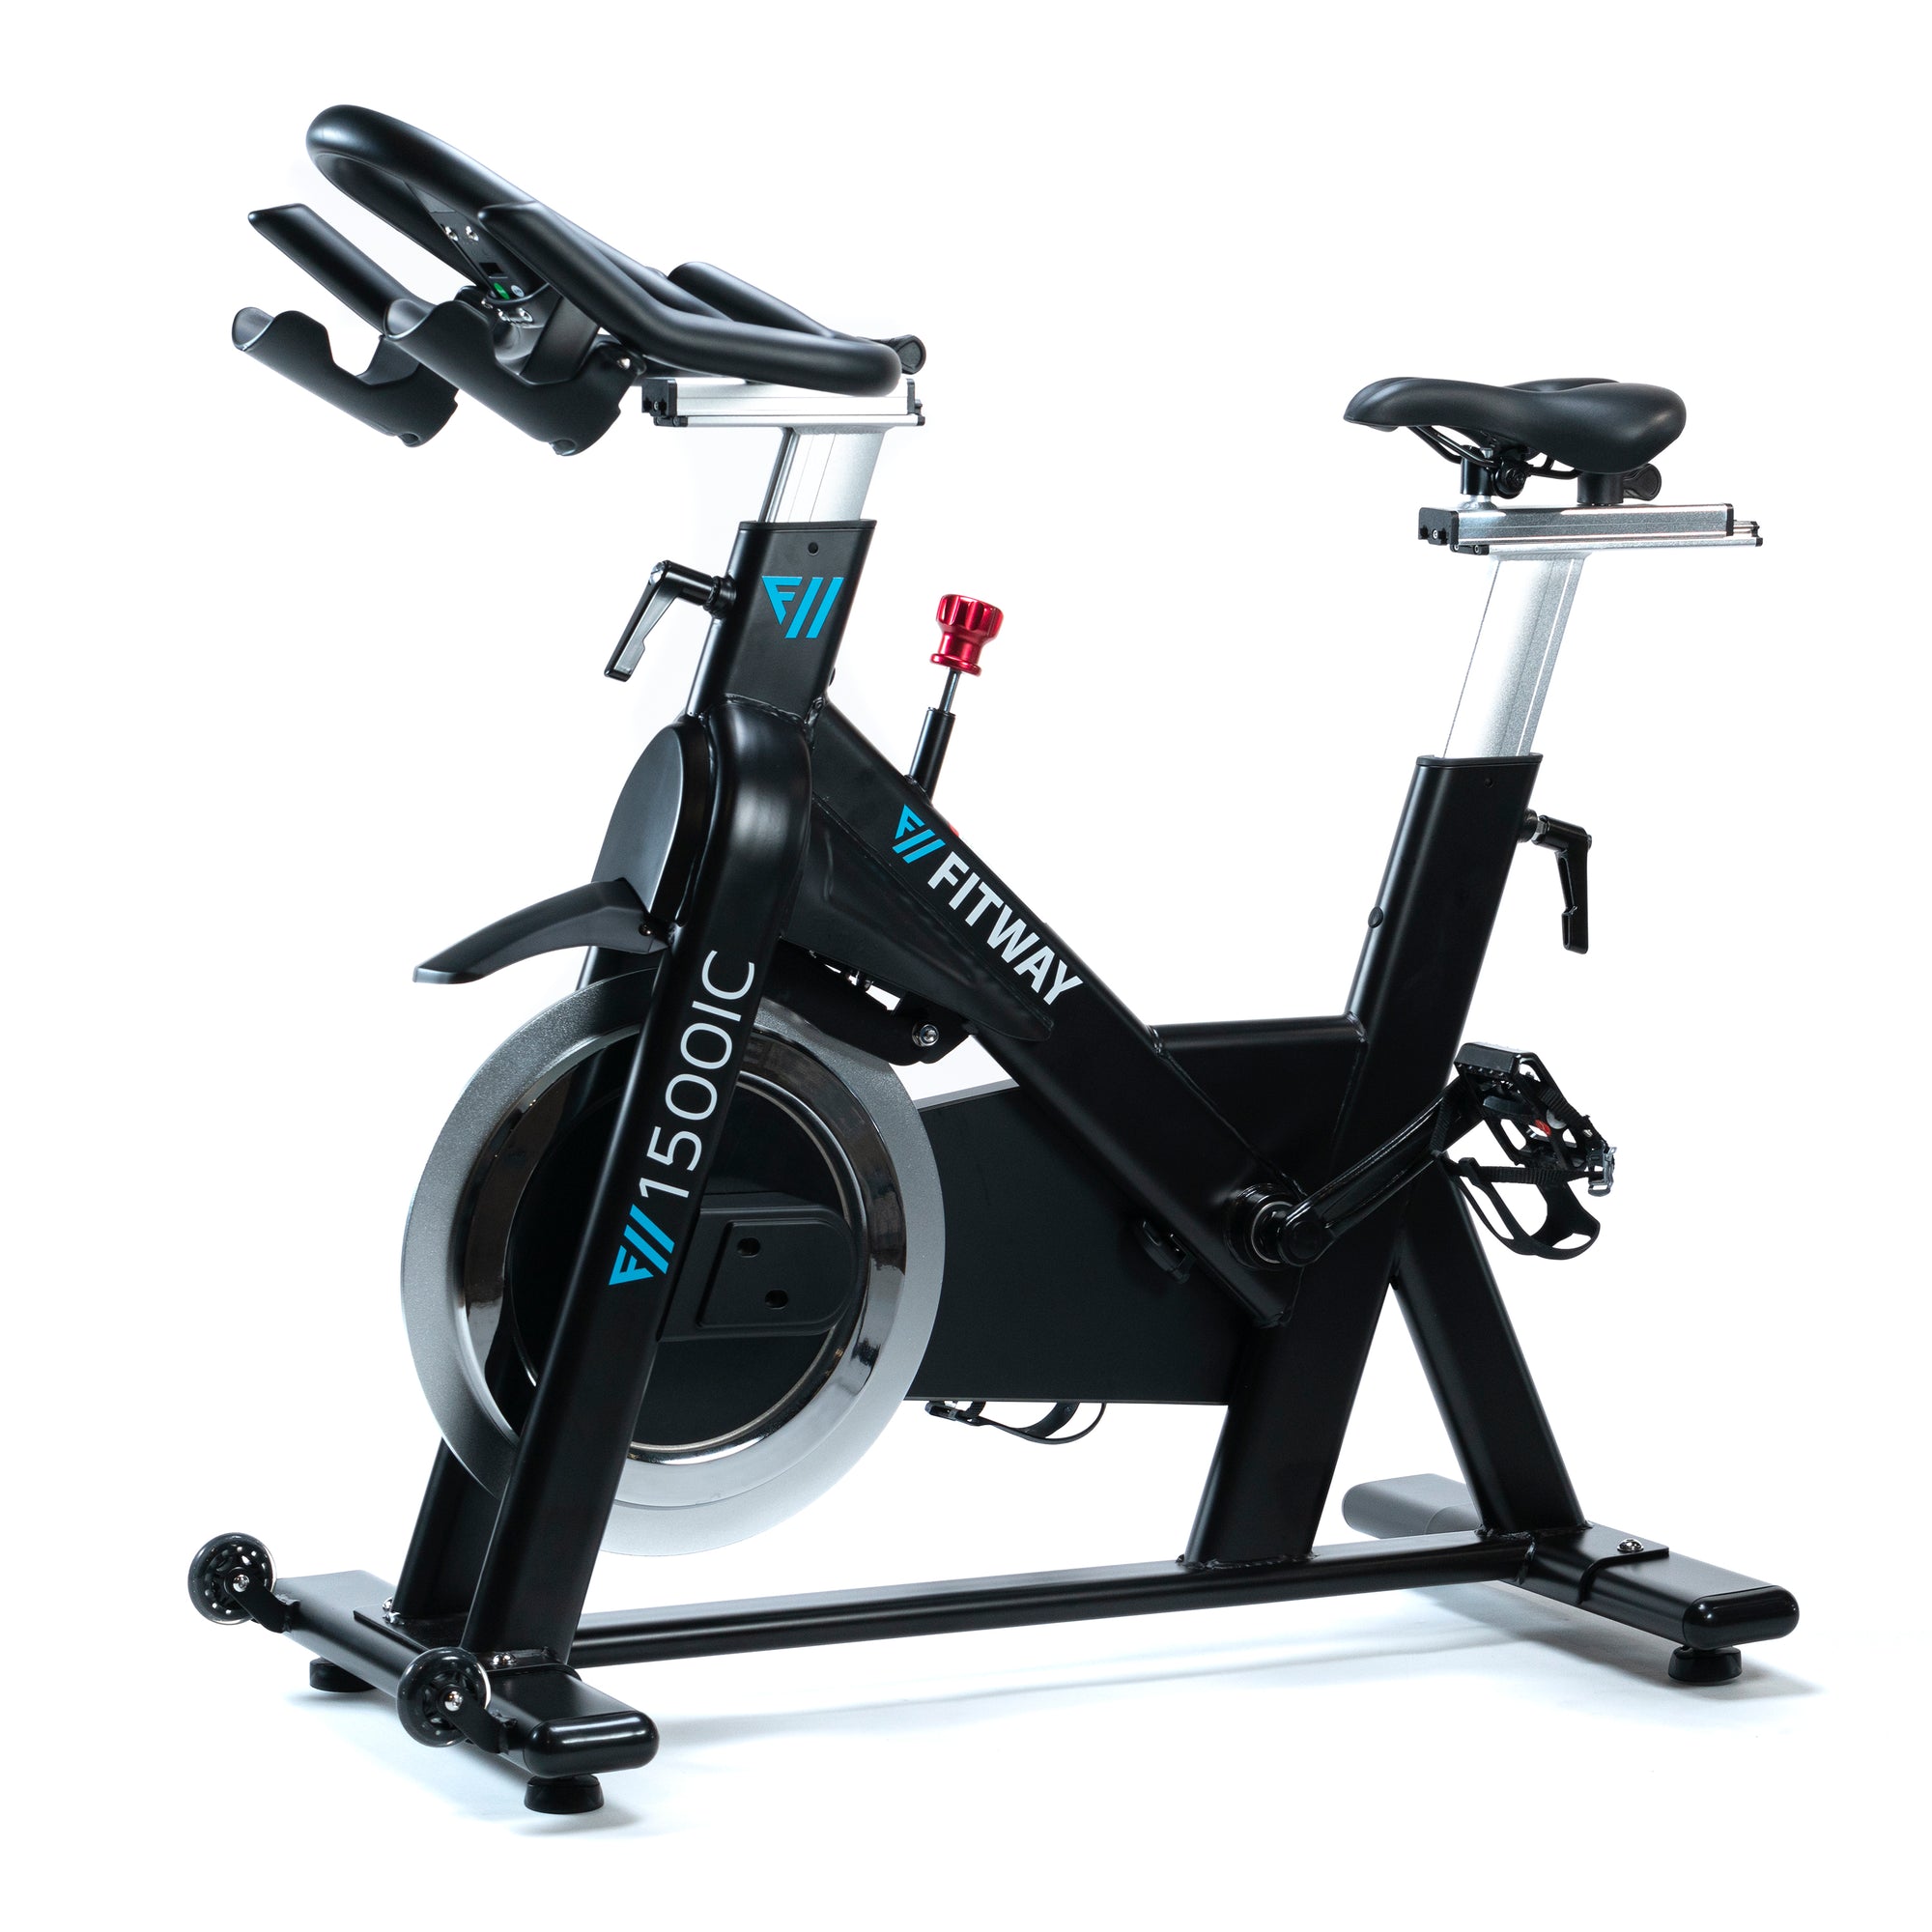 FitWay Equip. 1500IC Indoor Cycle full view